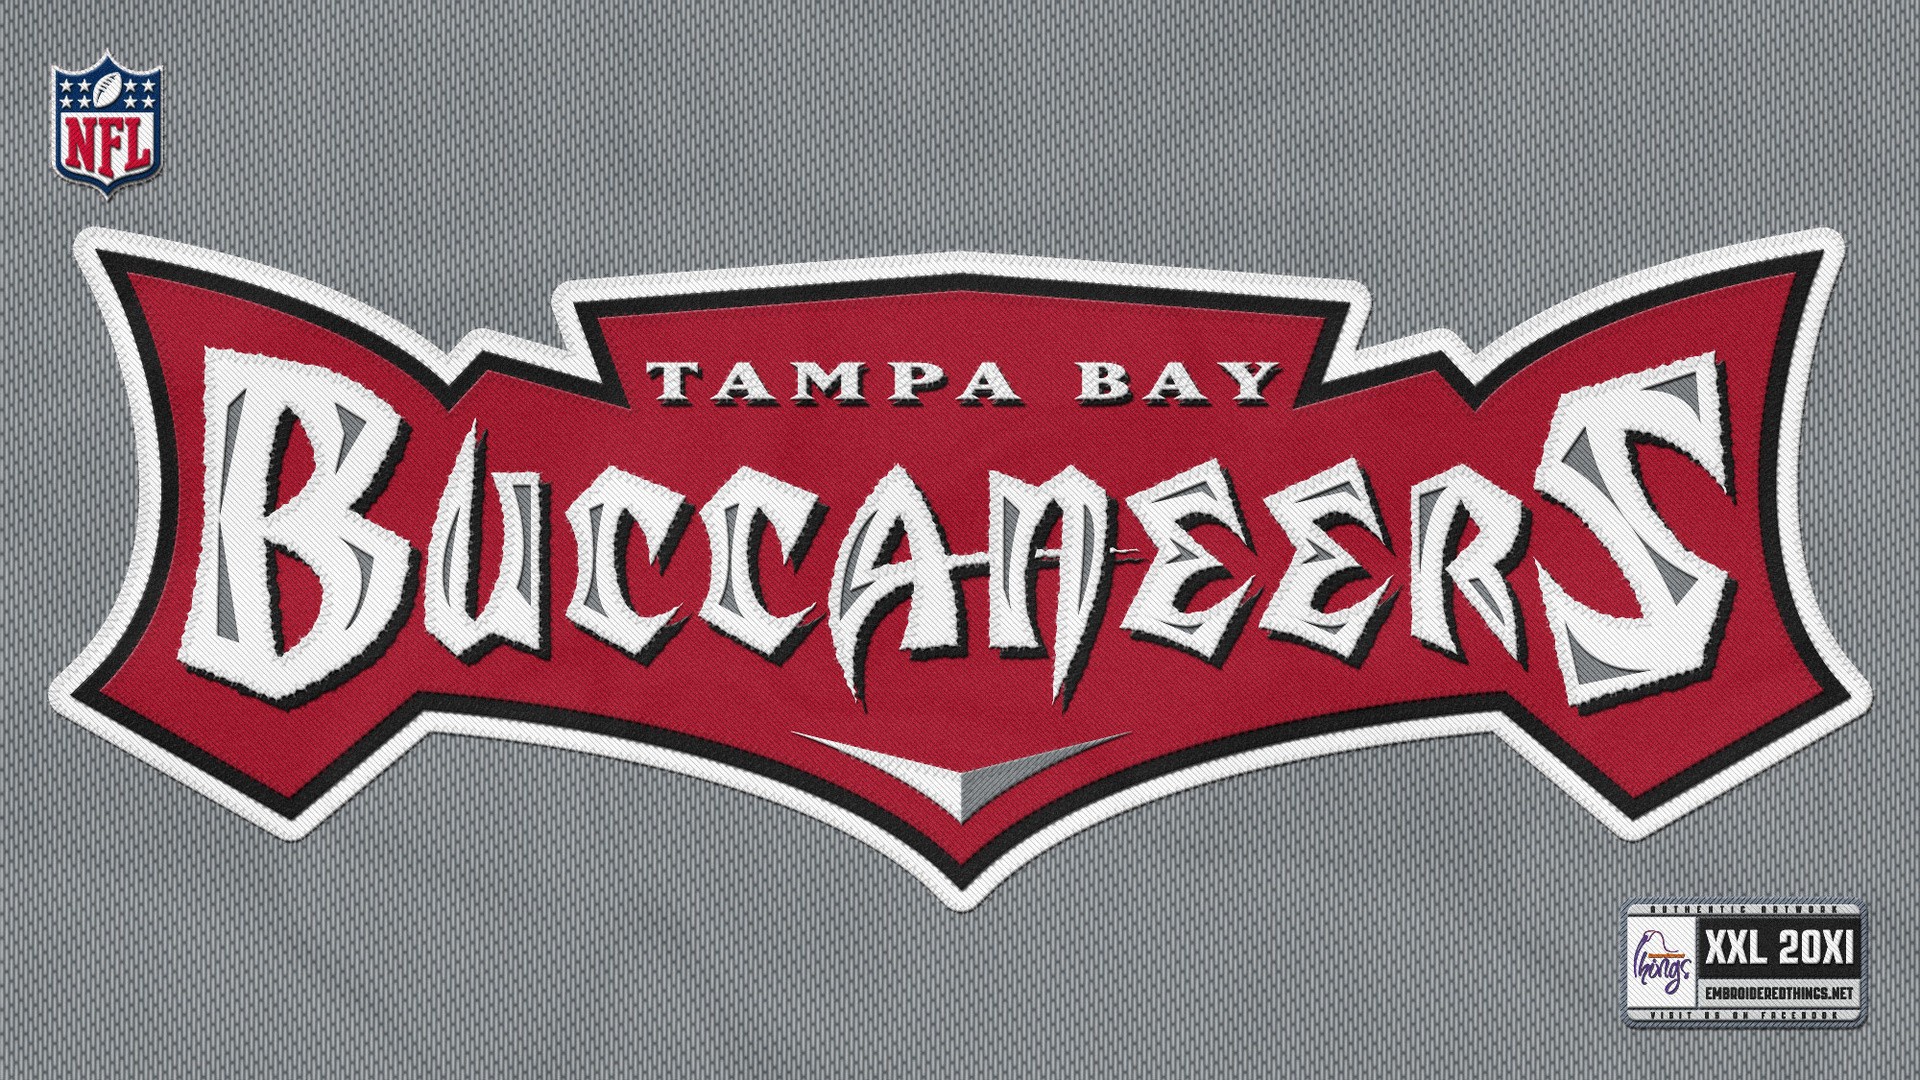 Desktop Wallpapers Tampa Bay Buccaneers With high-resolution 1920X1080 pixel. Download and set as wallpaper for Desktop Computer, Apple iPhone X, XS Max, XR, 8, 7, 6, SE, iPad, Android